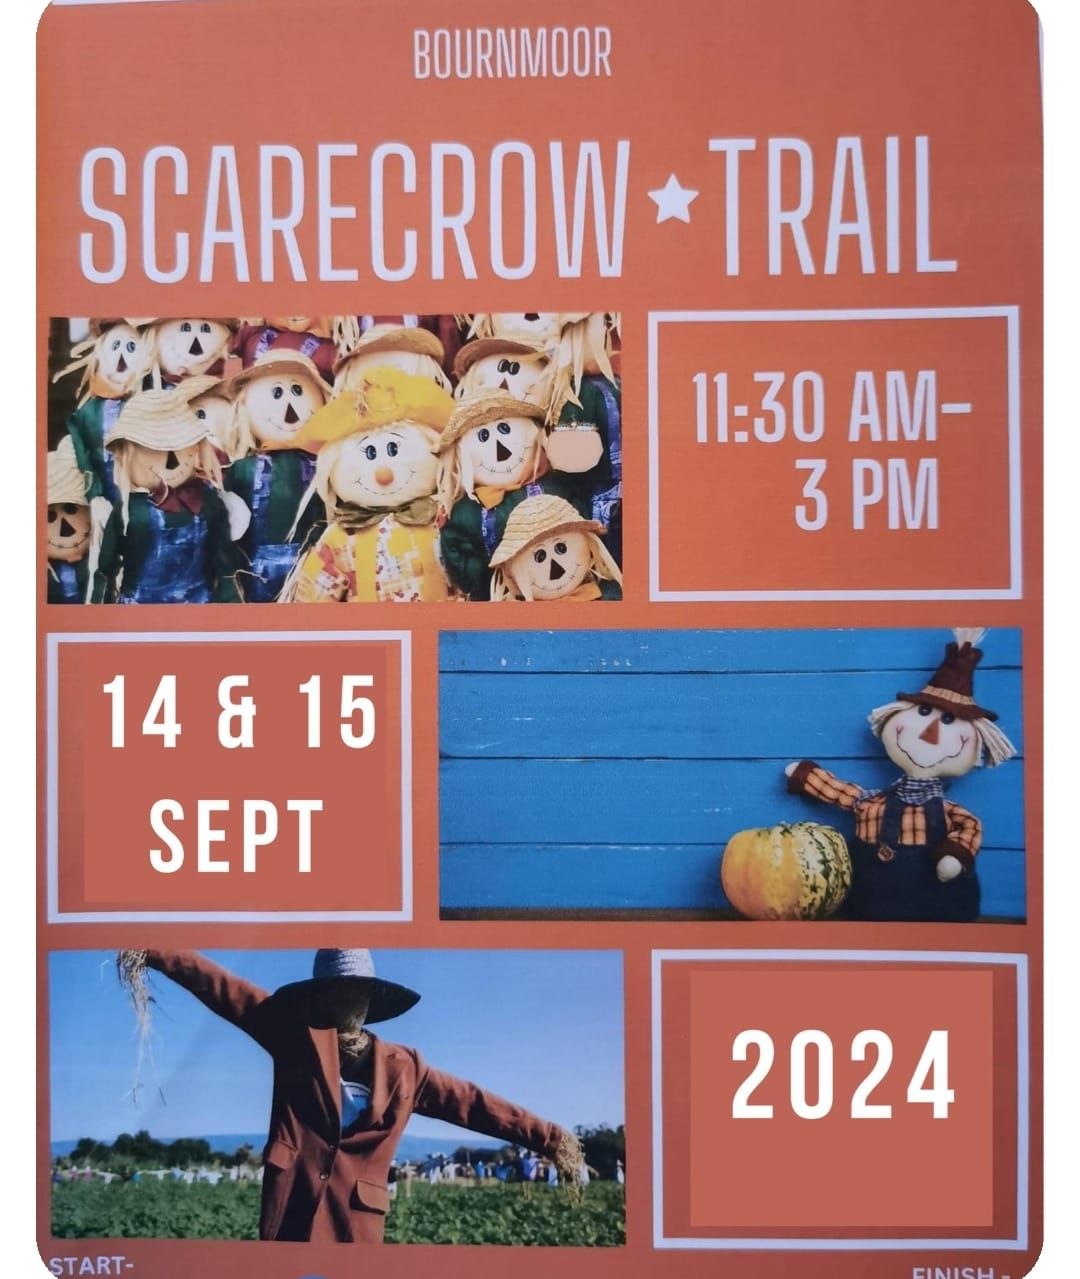 BOURNMOOR'S 2ND SCARECROW TRAIL